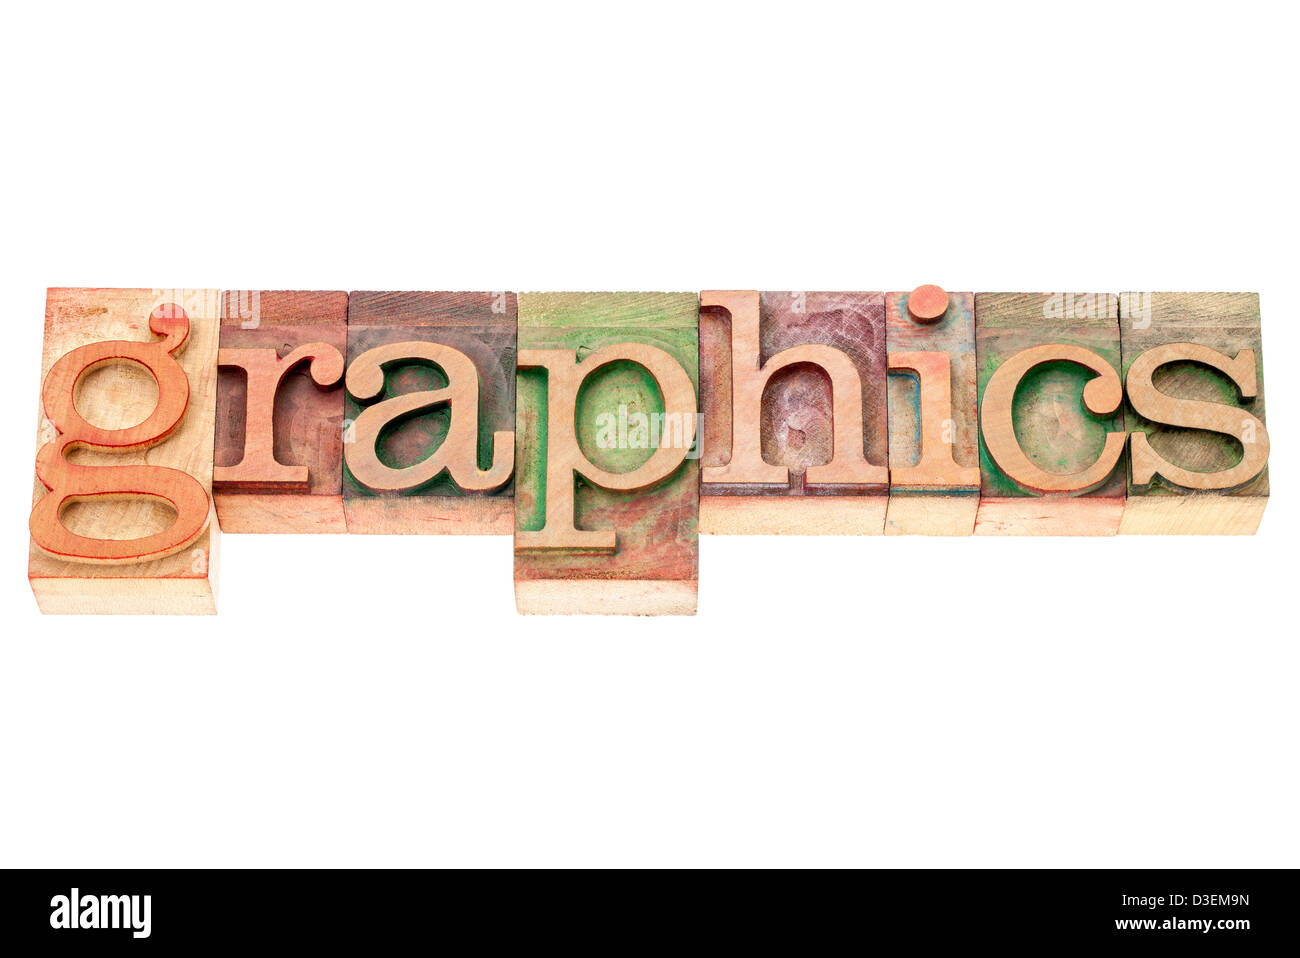 graphics word - isolated text in vintage letterpress wood type printing blocks Stock Photo